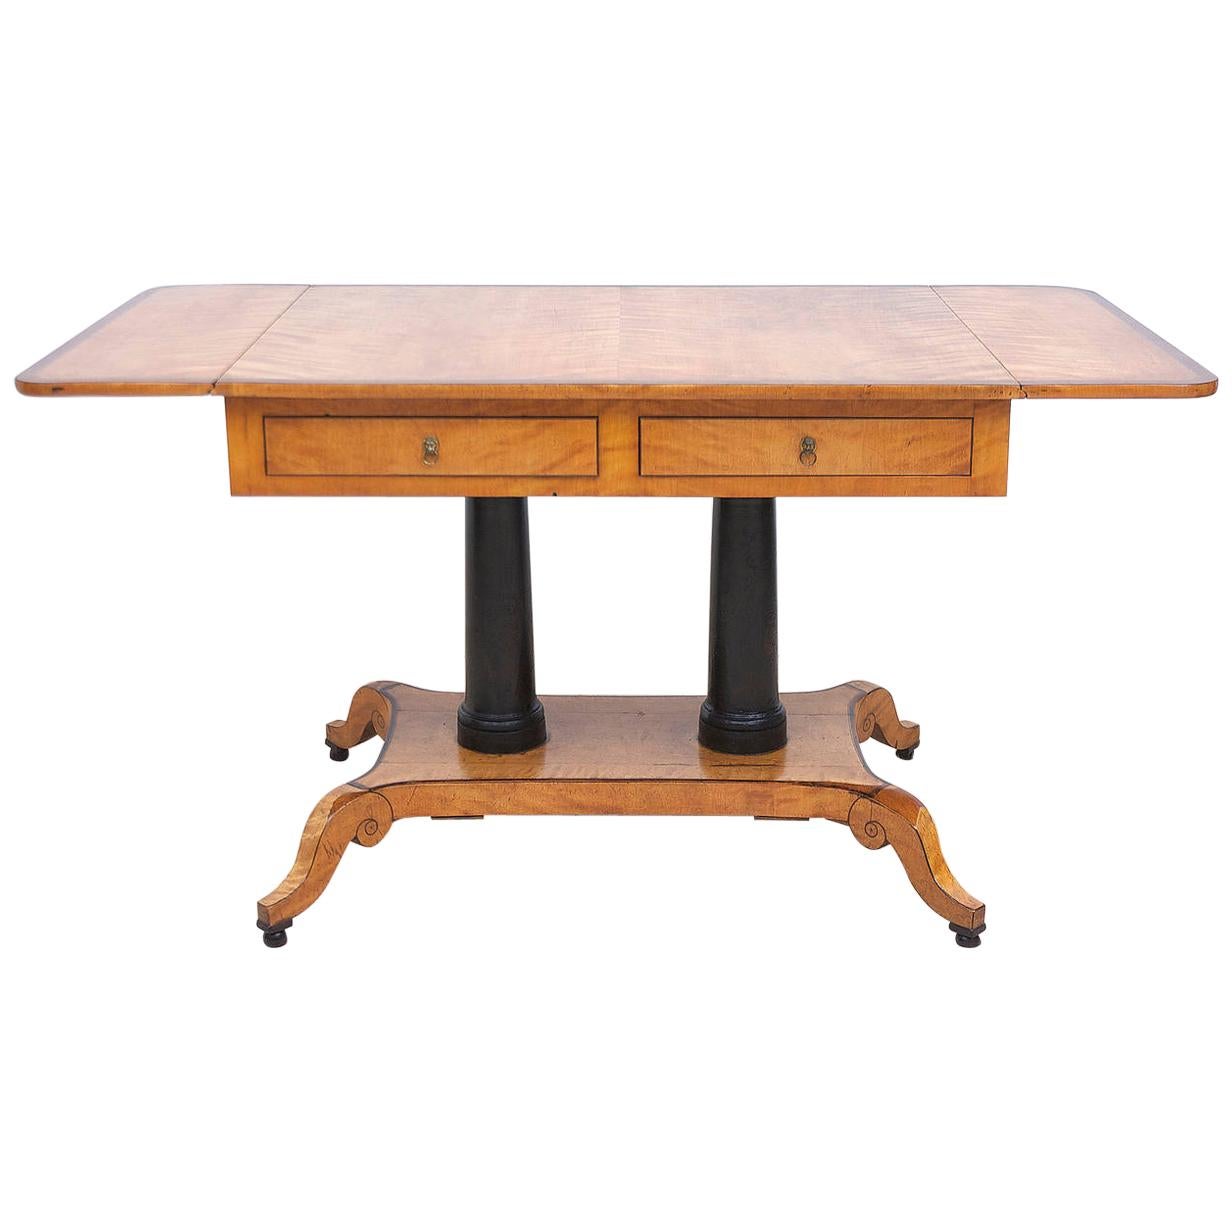 Scandinavian Karl Johan Birch Writing Table from the Estate of Alfred Grenander